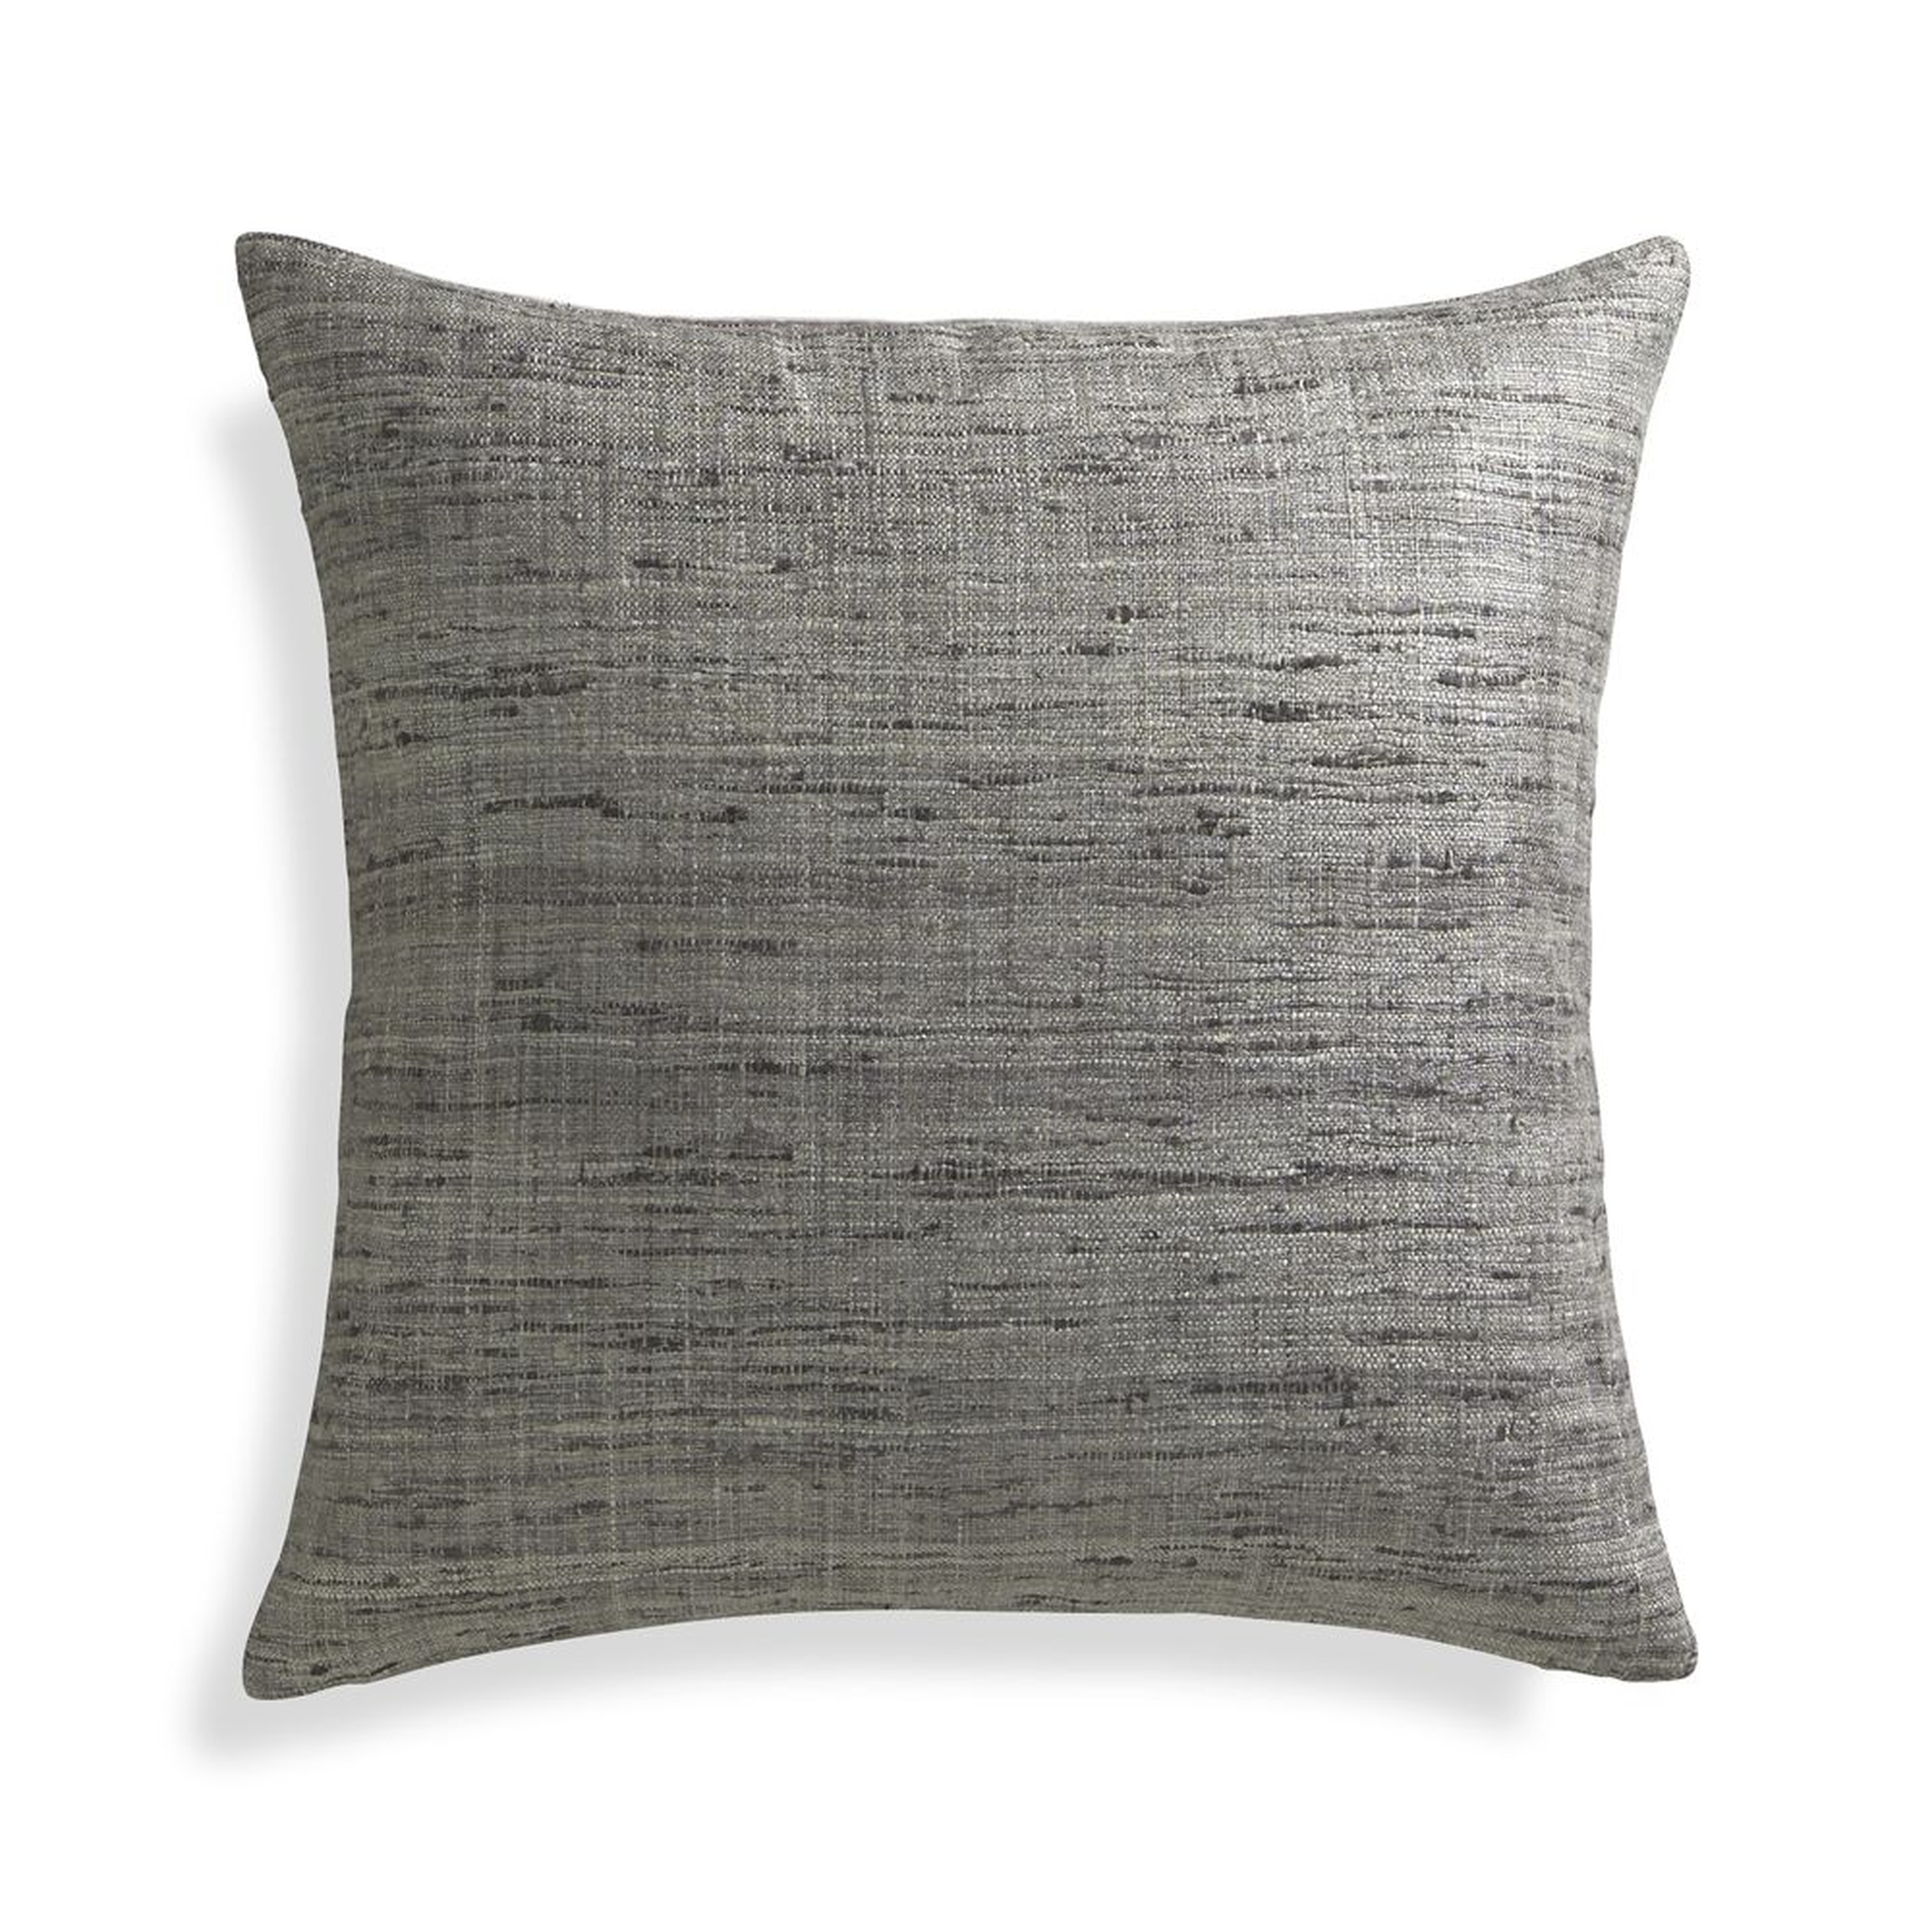 Trevino Nickel Grey 20" Pillow Cover - Crate and Barrel